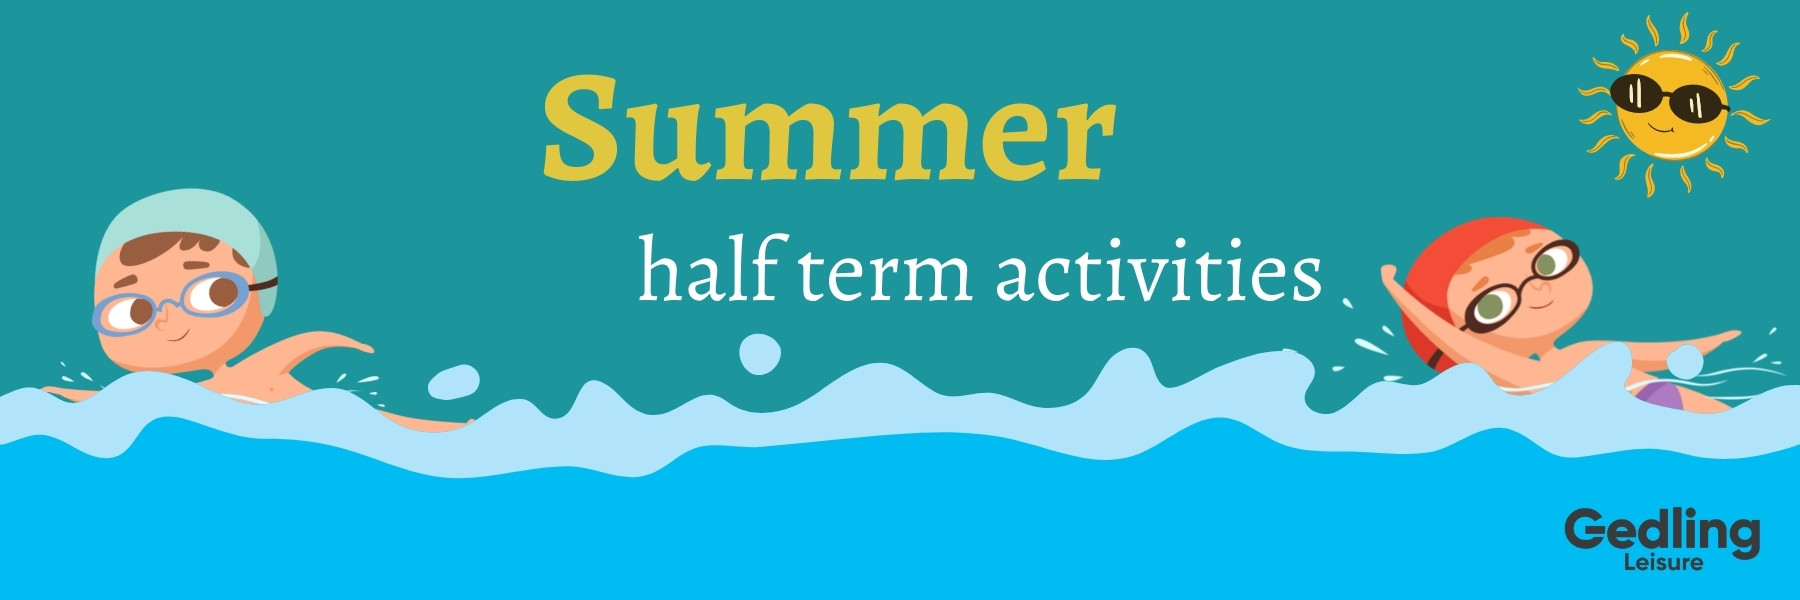 Illustration of two children swimming and a sun wearing sunglasses. Summer half term activities